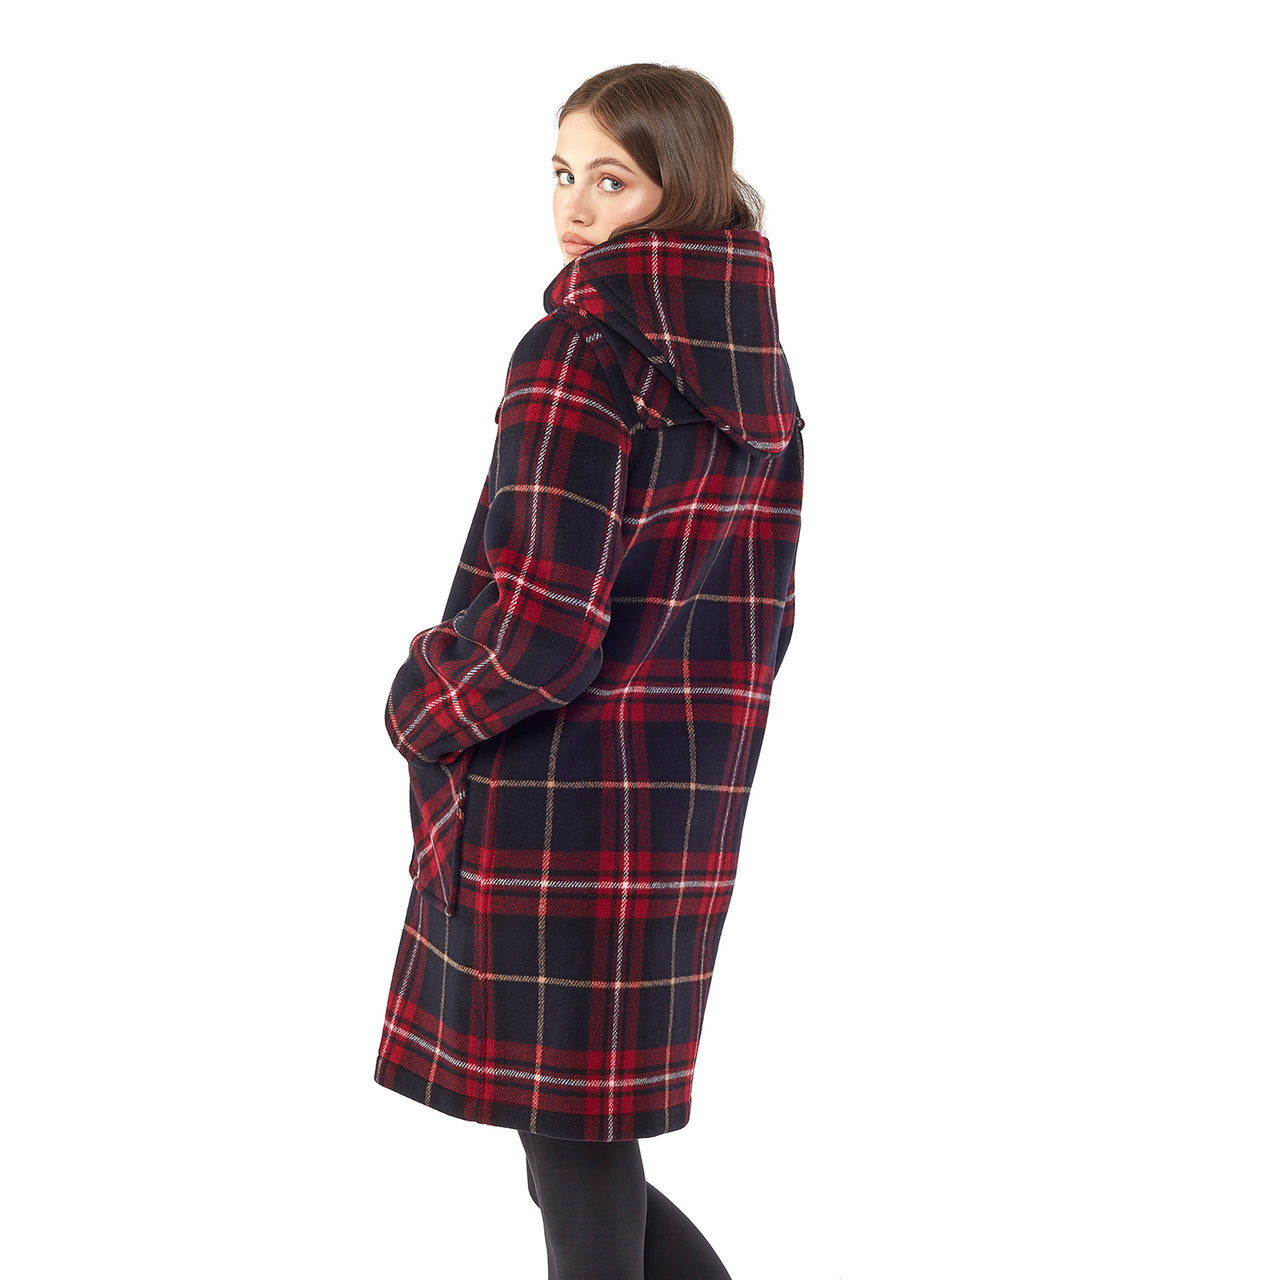 Women's Classic Fit Duffle Coat with Wooden Toggles - Burgundy Check